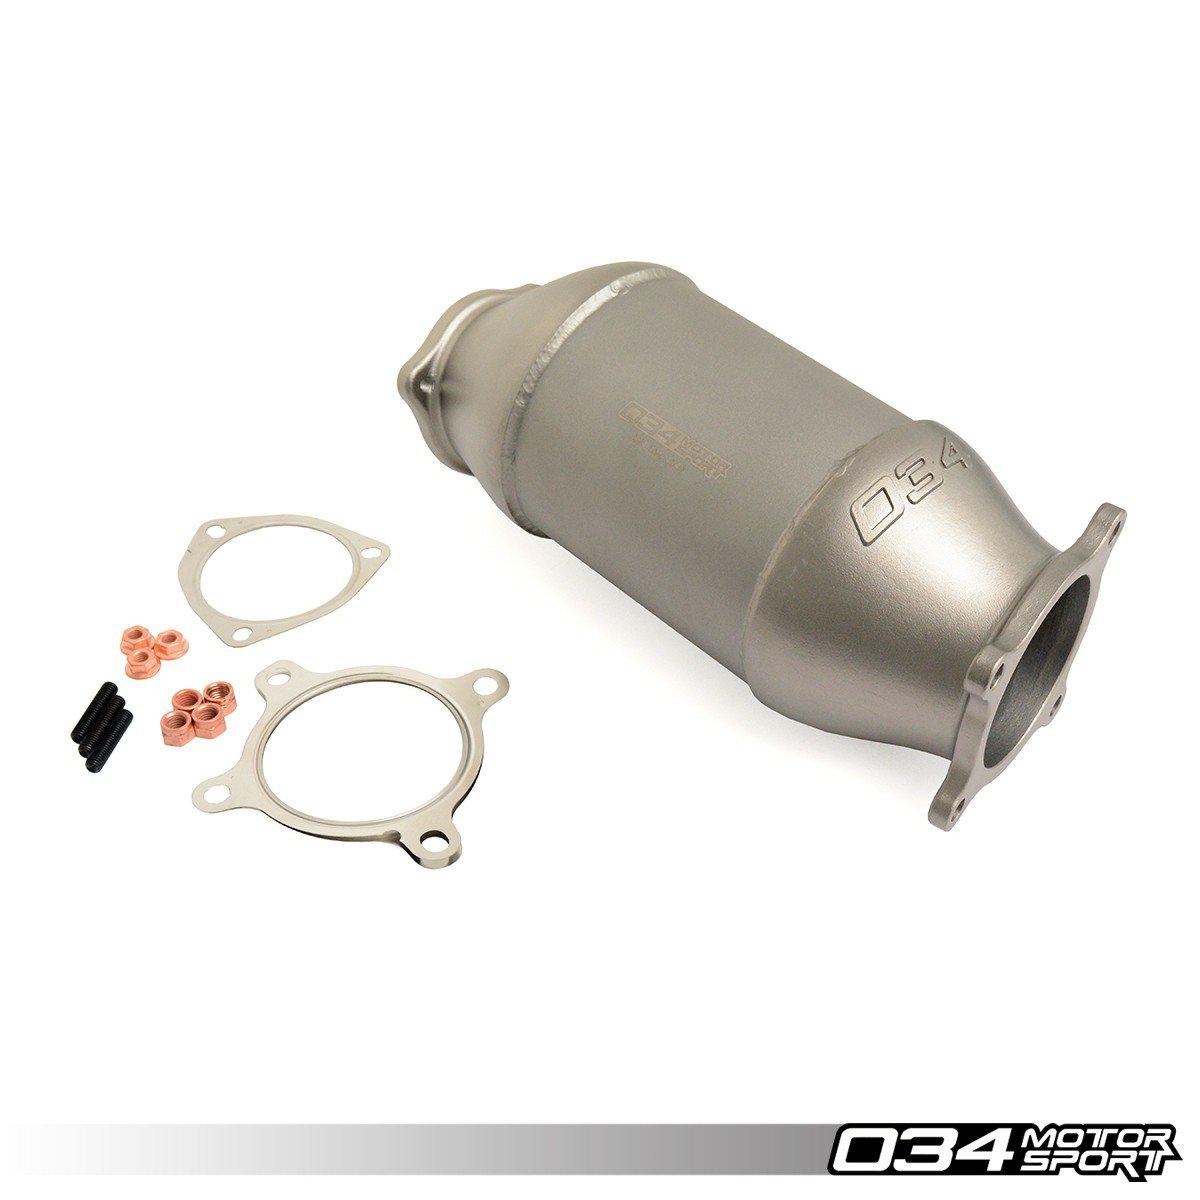 Cast Stainless Steel Racing Catalyst, B9 Audi A4/A5 &amp; Allroad 2.0 TFSI-A Little Tuning Co